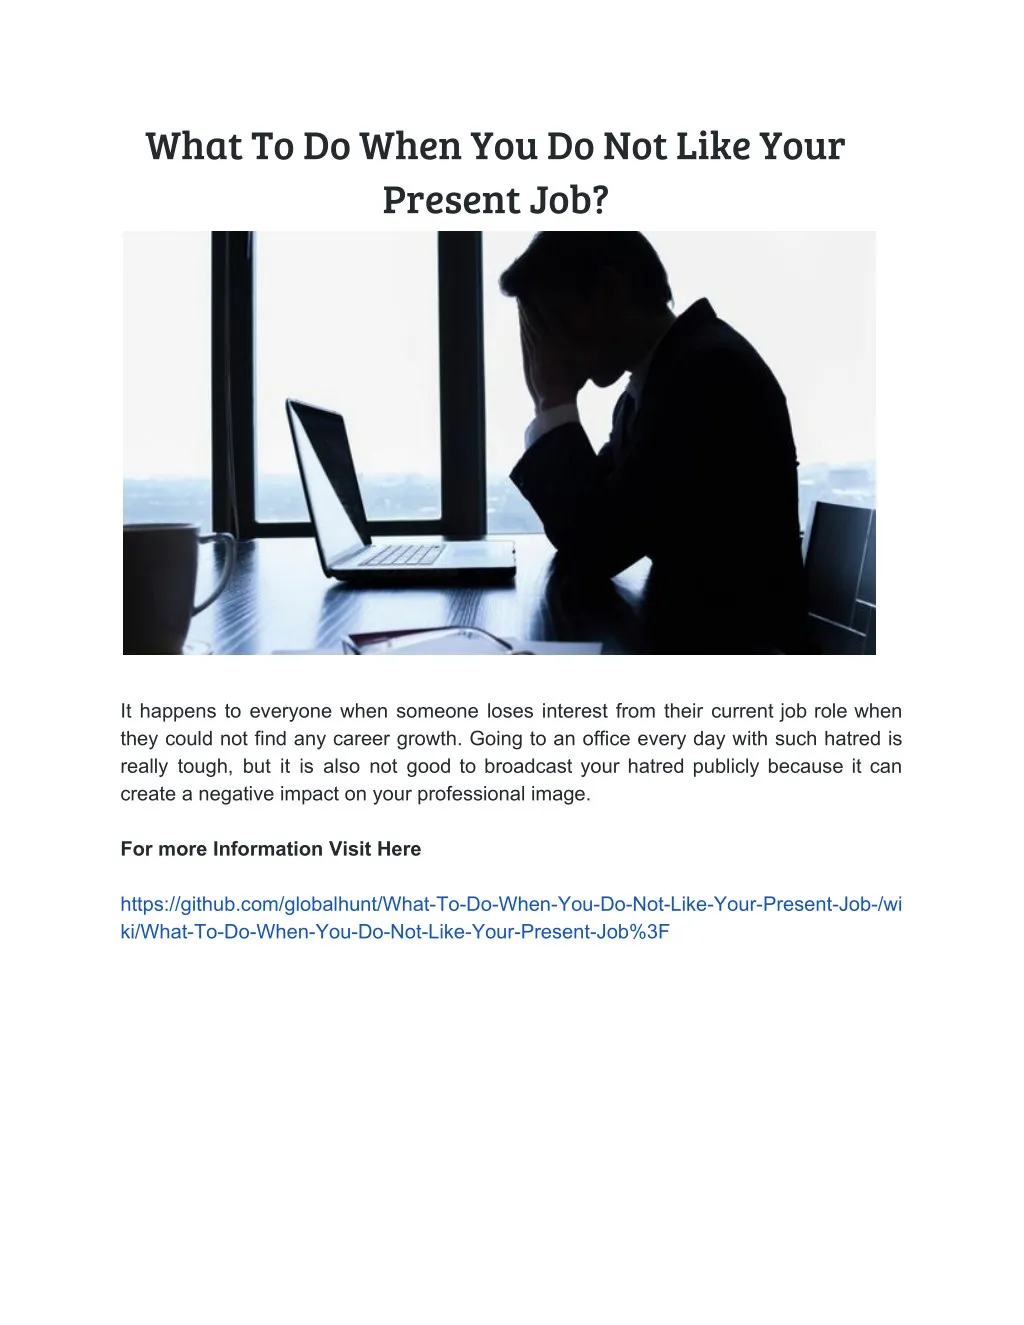 what to do when you do not like your present job